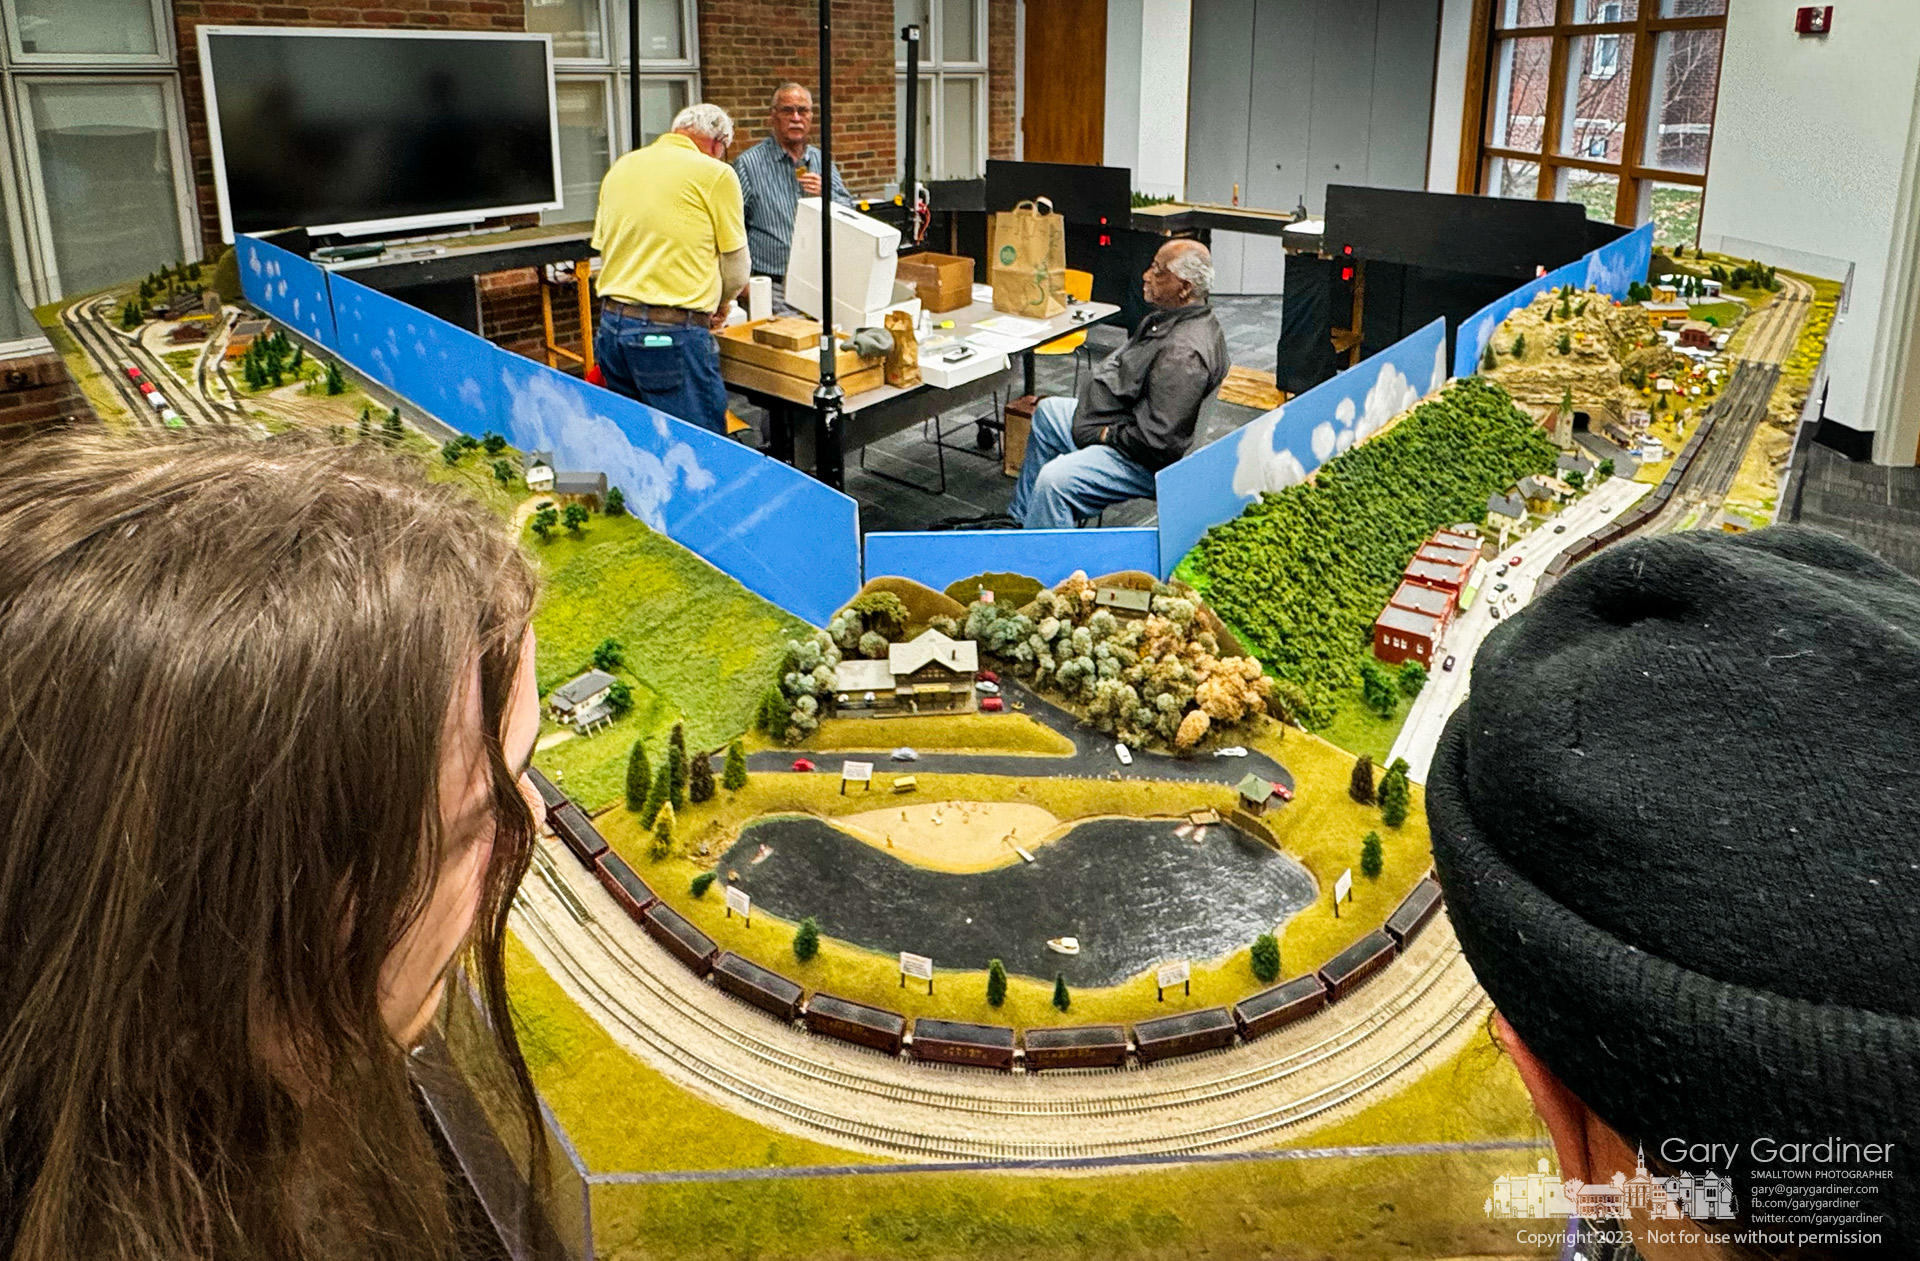 A pair of amateur model train enthusiasts watch "N" scale trains run their course in a room at the Westerville Public Library where the Columbus Area "N" Scalers set up its annual display. My Final Photo for December 8, 2023.